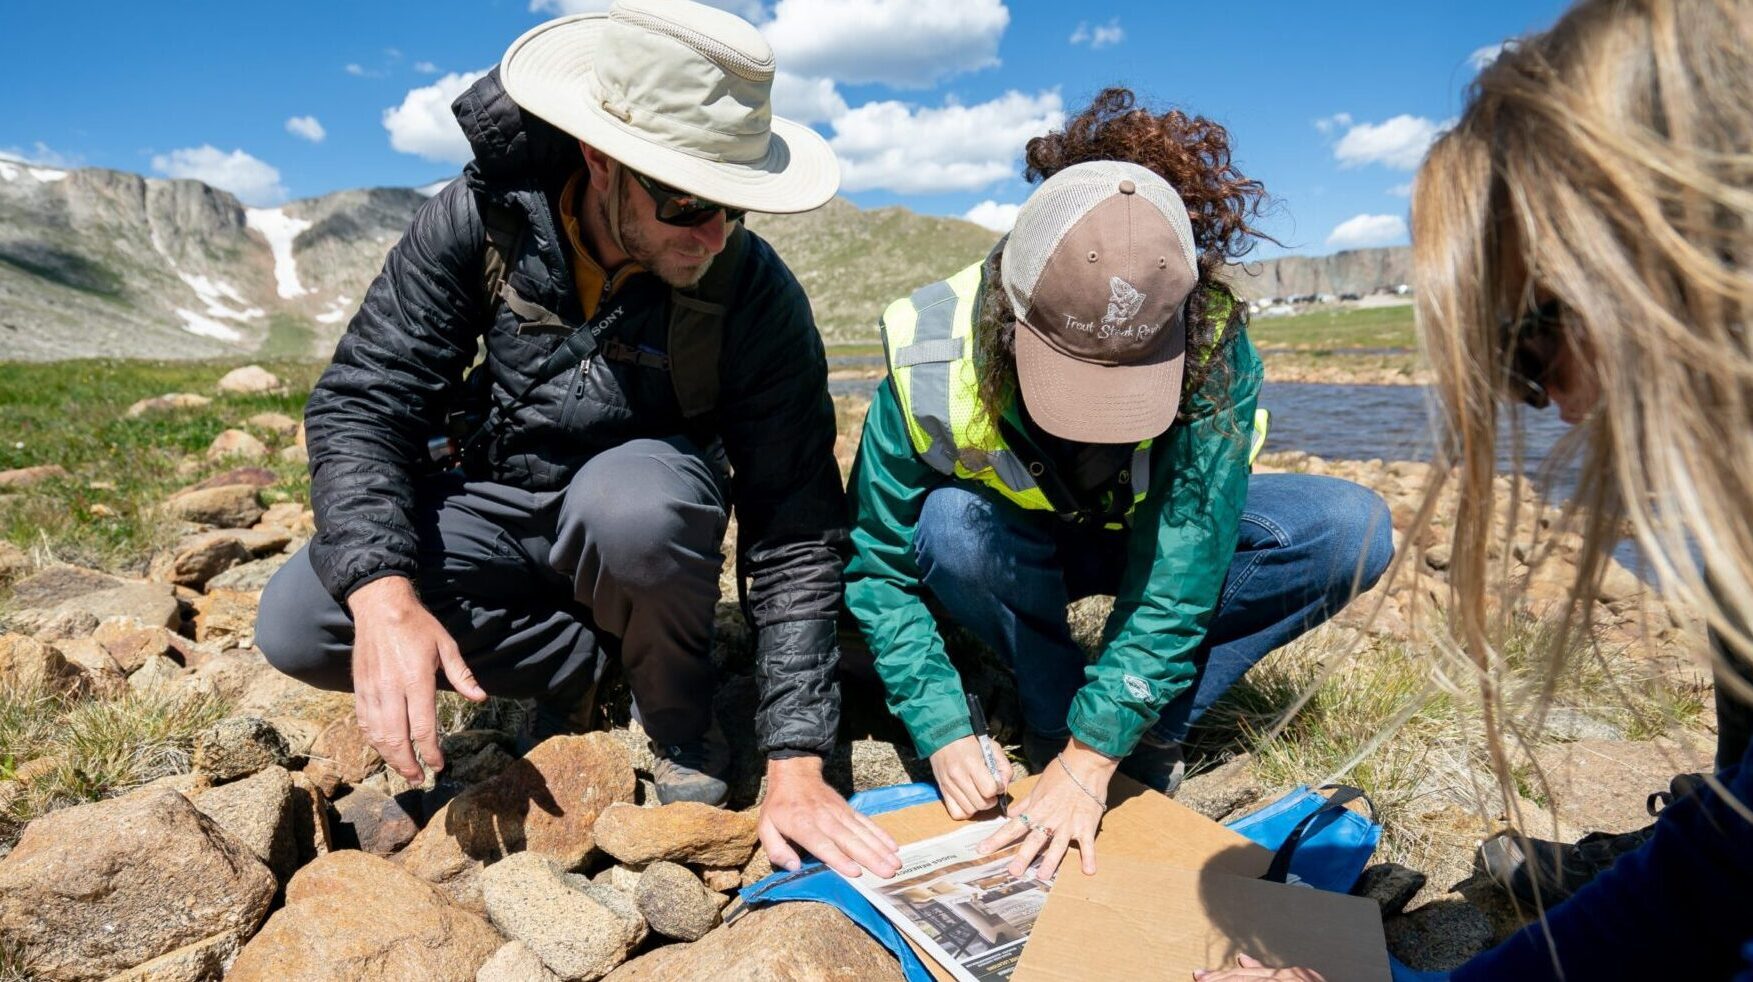 Alpine Research and Sample Collection | NAGB Alpine Strategy